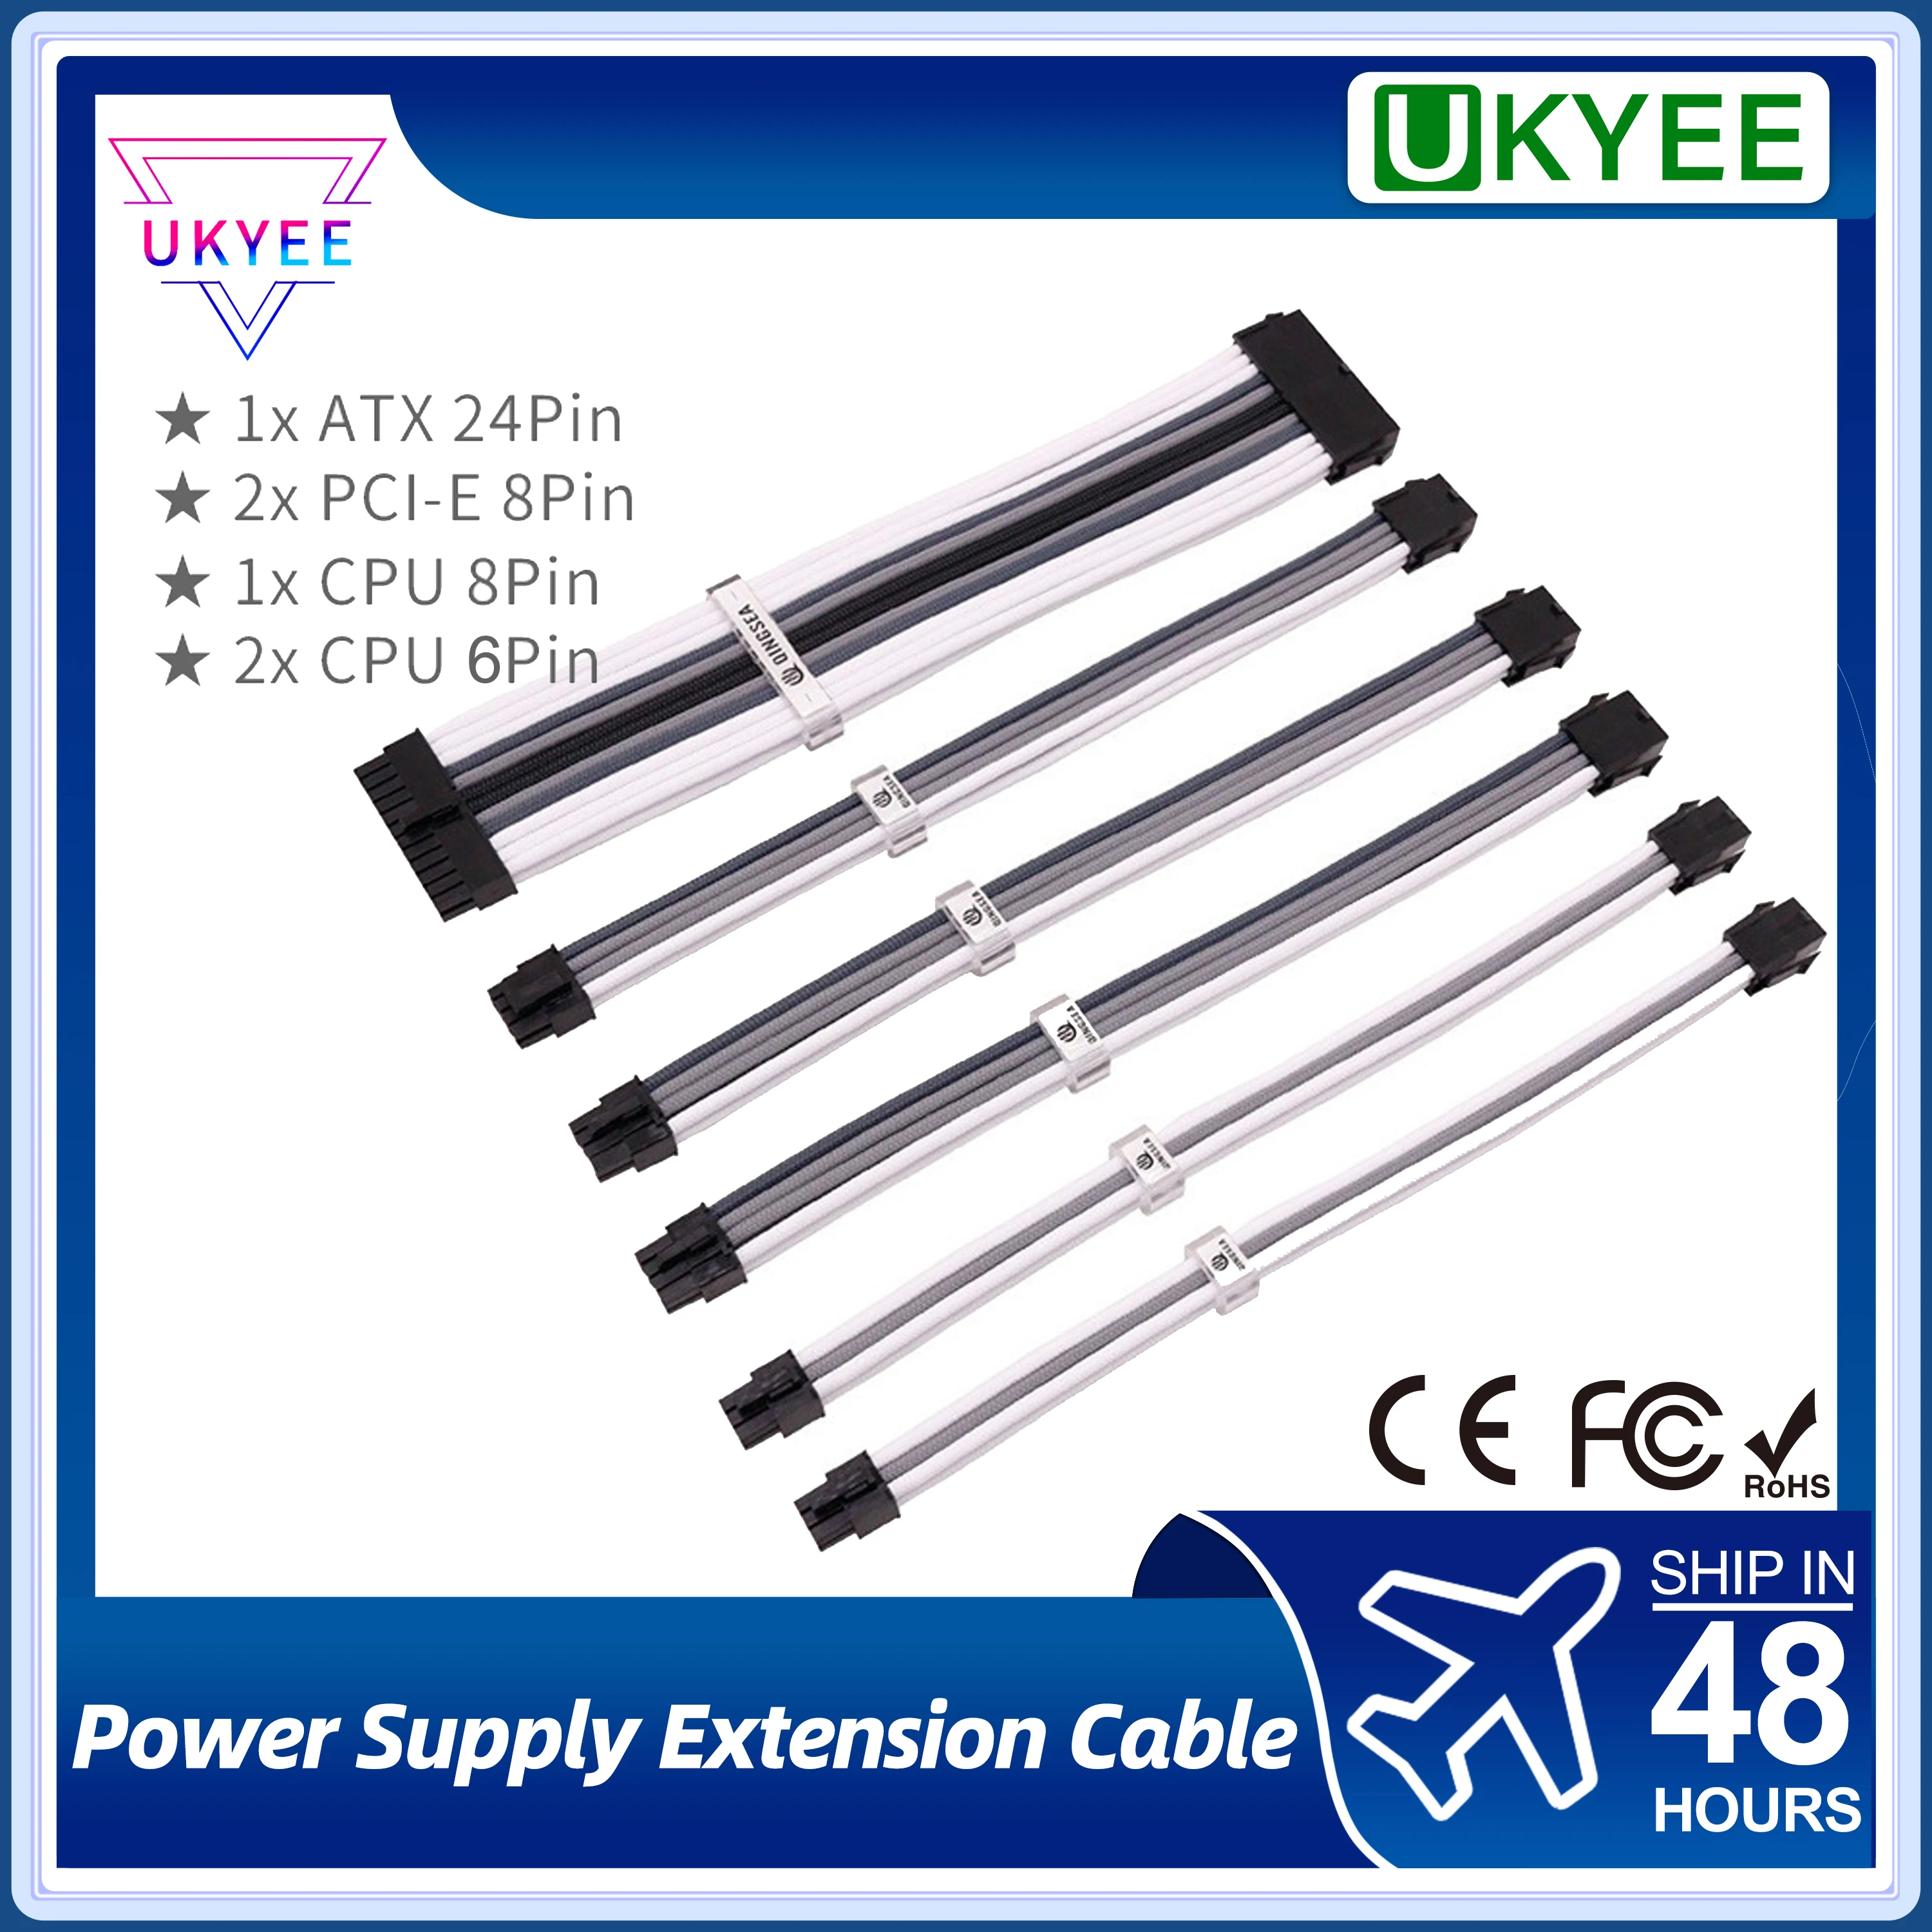 

UKYEE PSU Extension Cable Set Nylon Braided Atx 24pin Pcie Dual Triple 8pin 6+2pin Cord 24pin Motherboard Extension With Comb